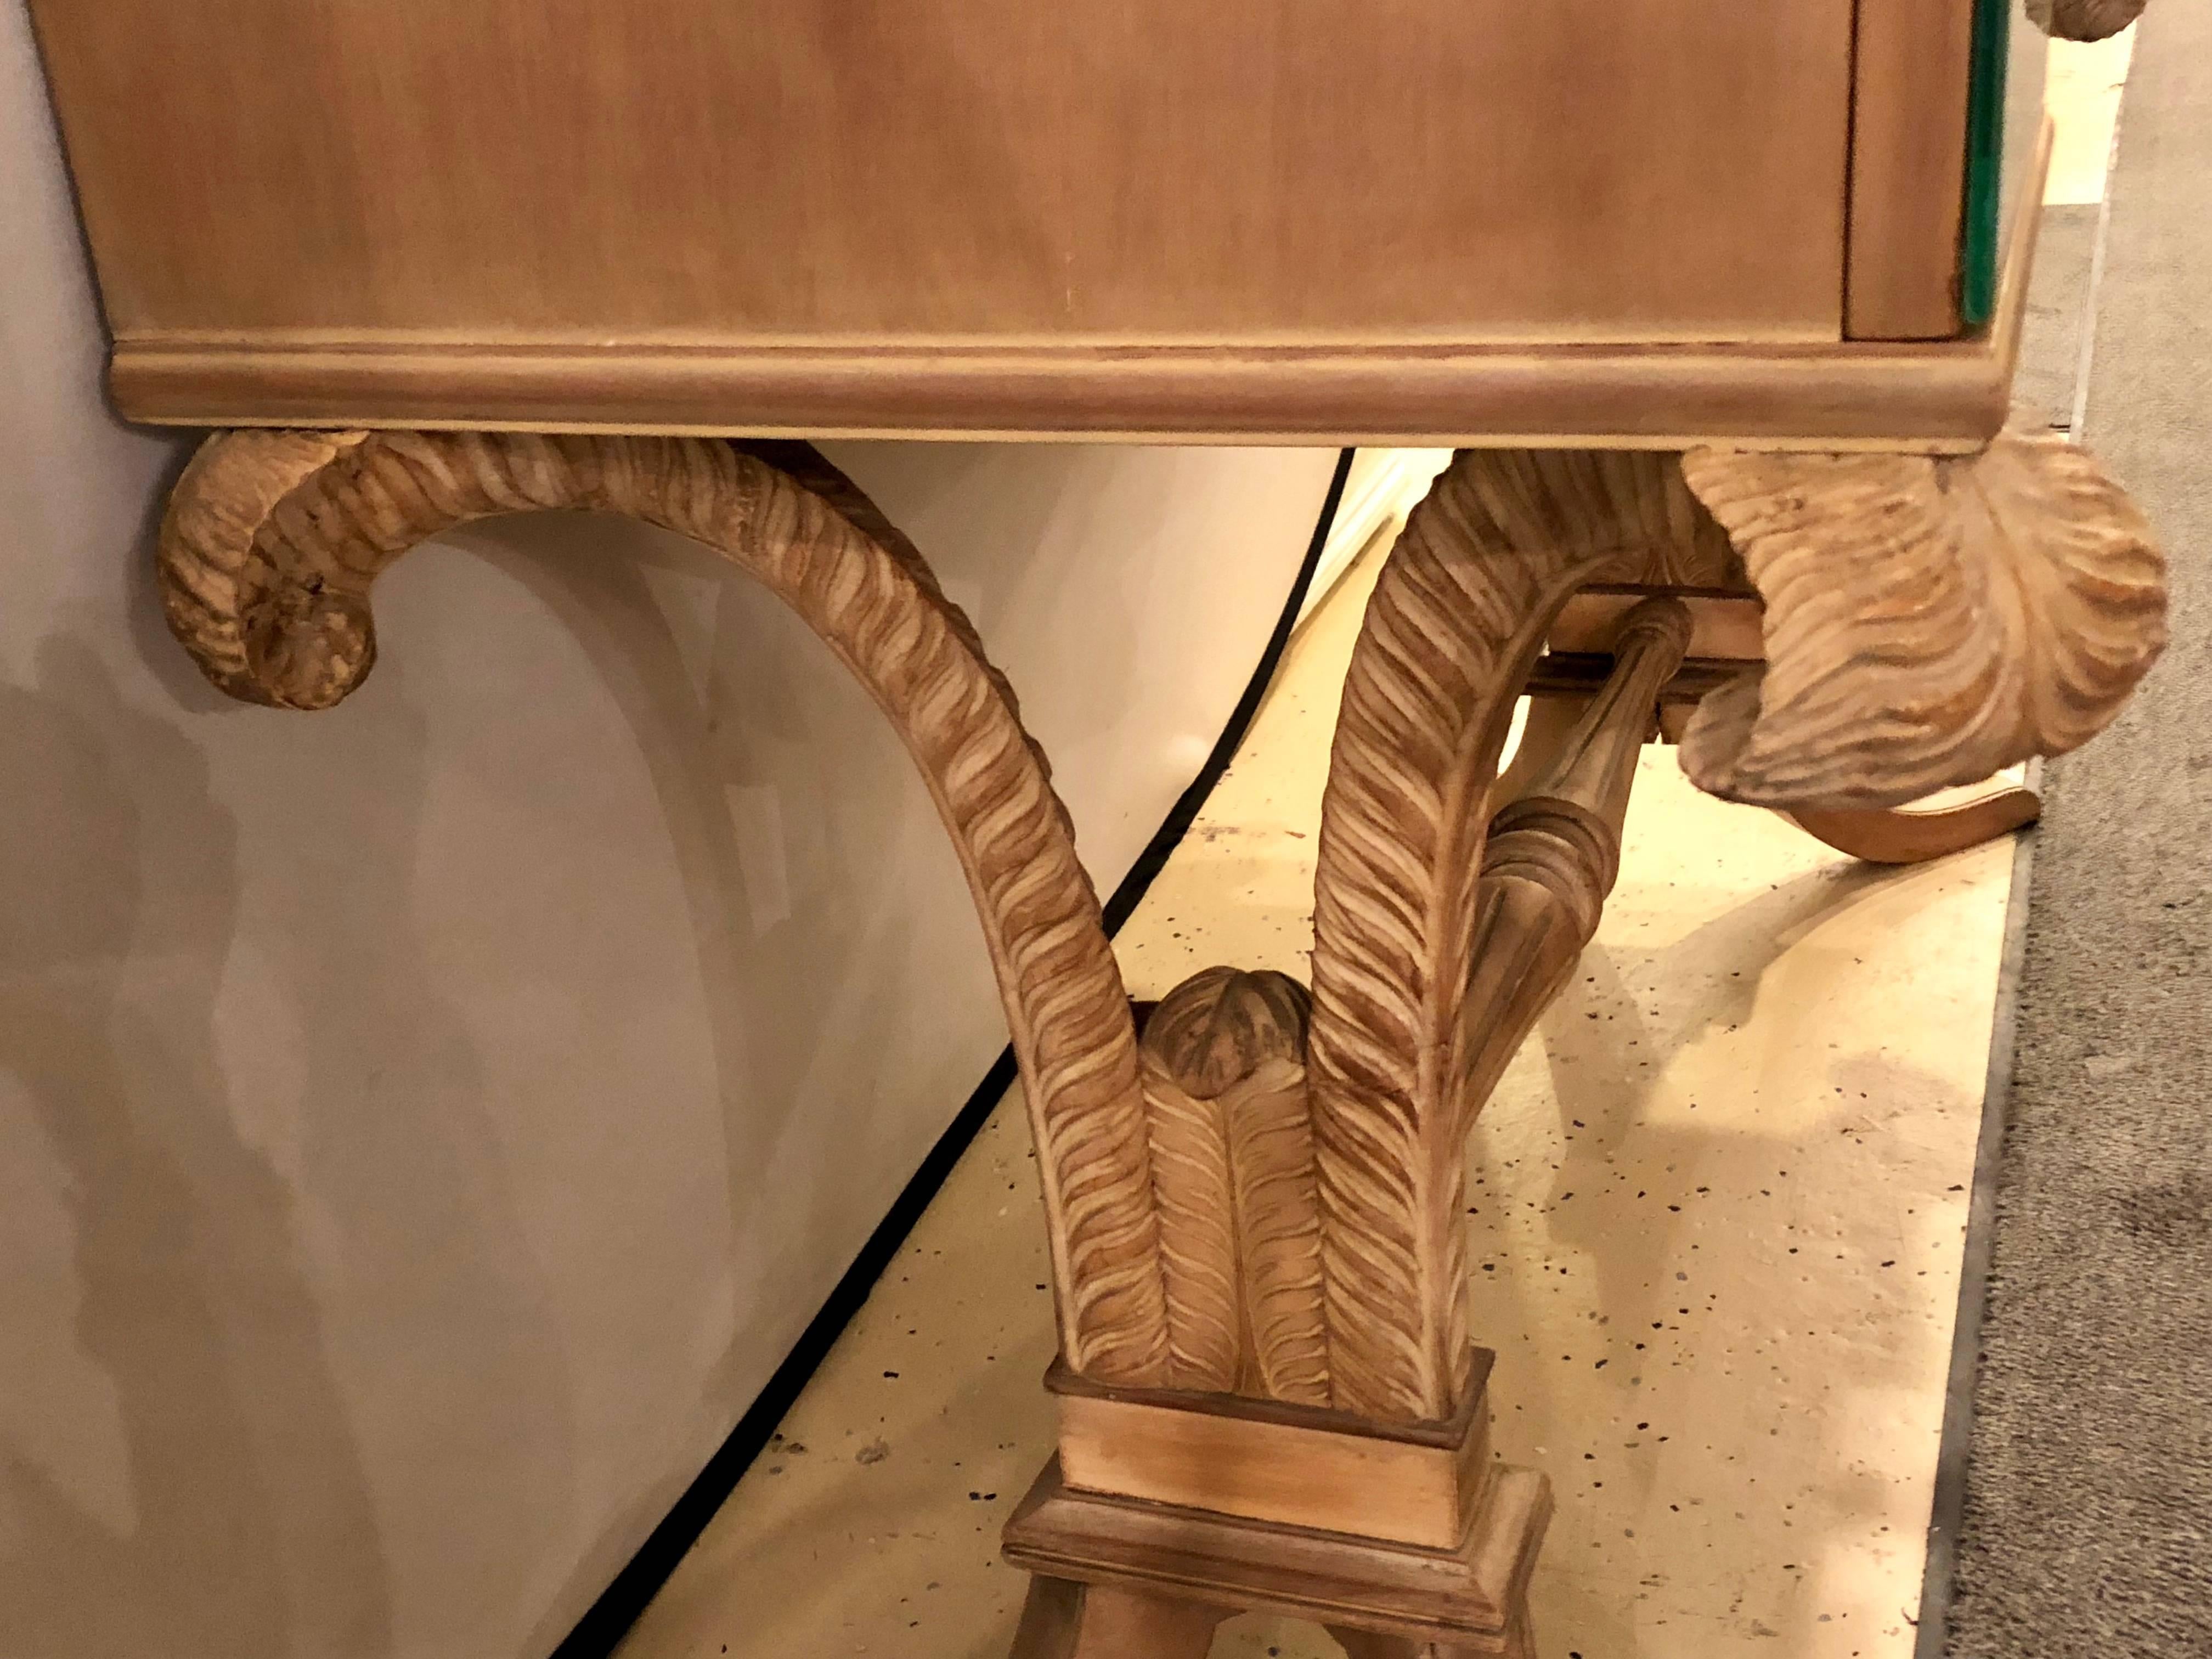 Mid-Century Modern Grosfeld House attributed plume decorated mirror and carved wood vanity. In a pickled finish comes this fine quality carved vanity or writing desk. Having sprayed legs leading to plume decorated supports under a three drawer